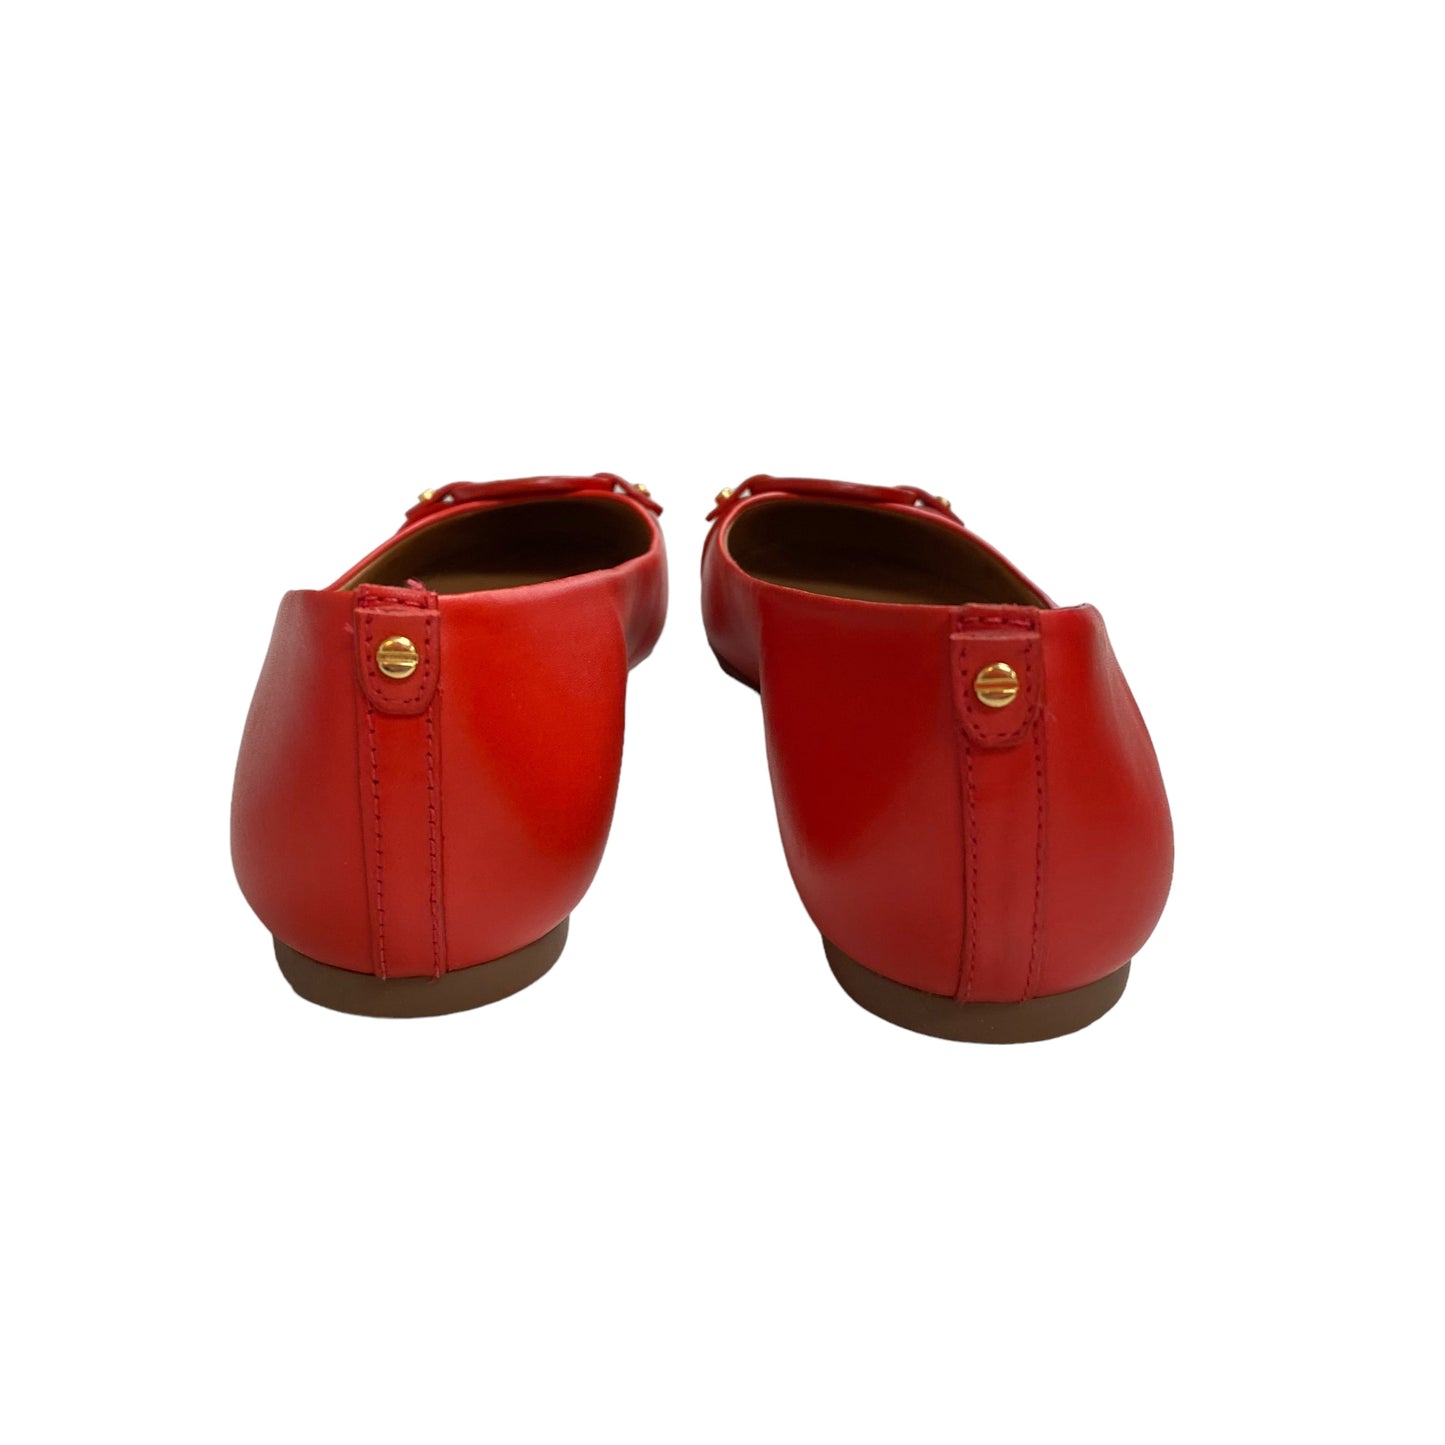 Red Shoes Designer Tory Burch, Size 7.5